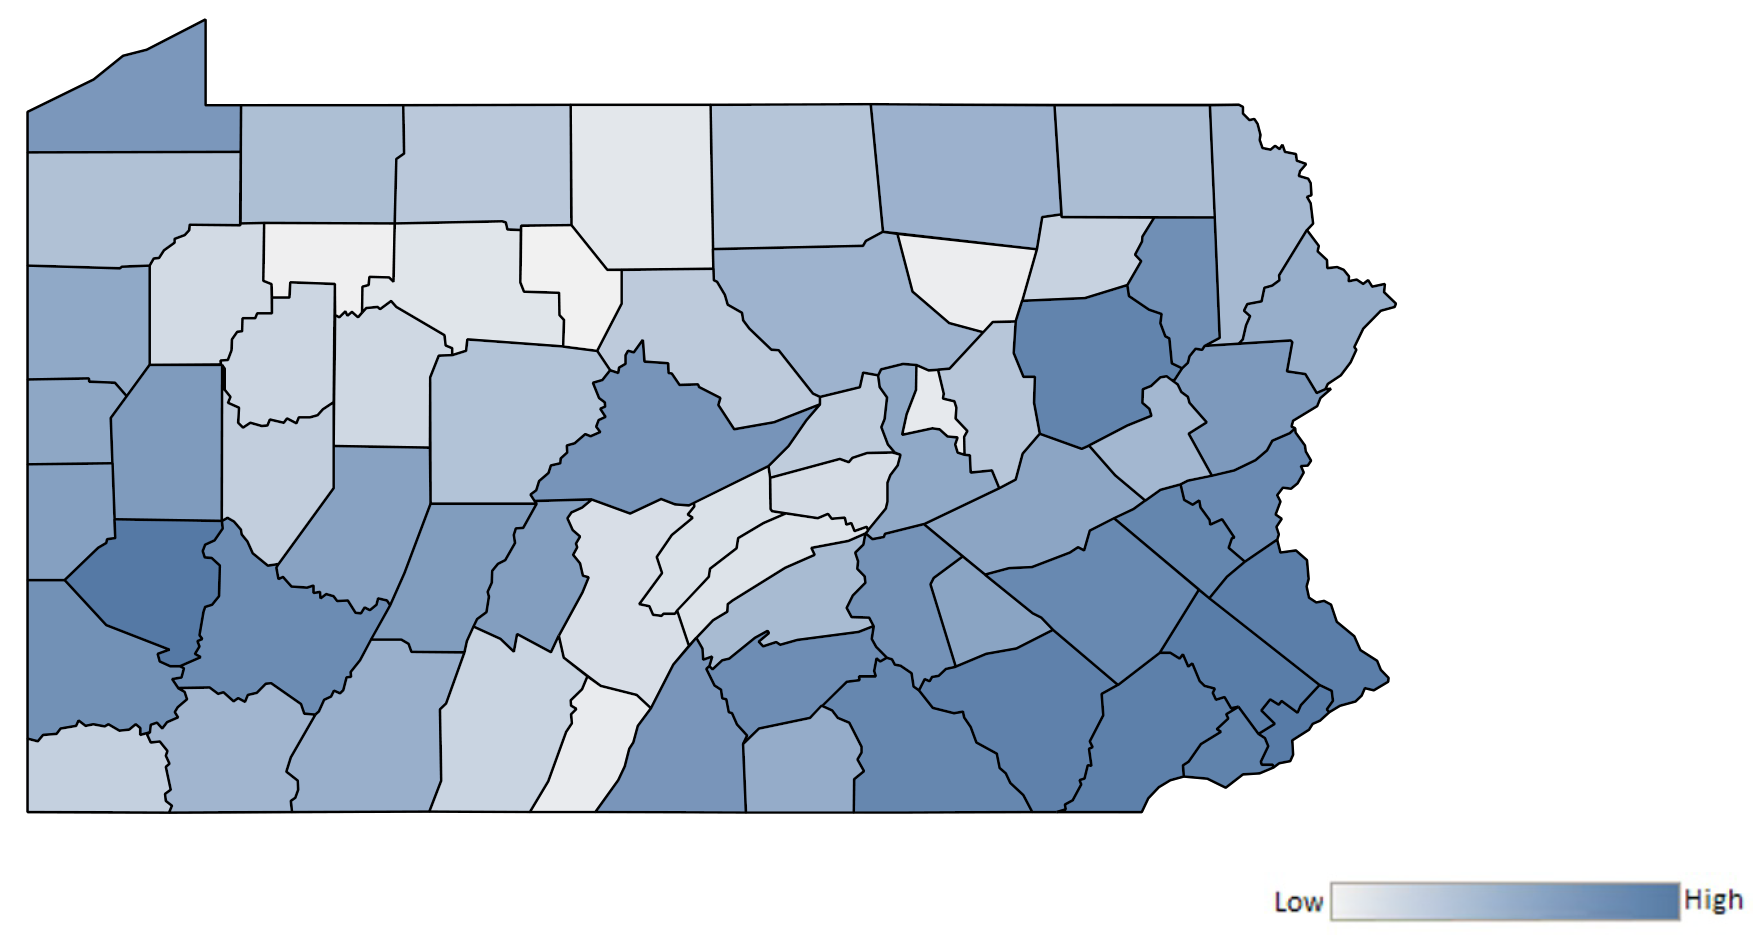 Map of Pennsylvania counties indicating relative number of complaints from low to high. See attached CSV file for complaint data by jurisdiction.